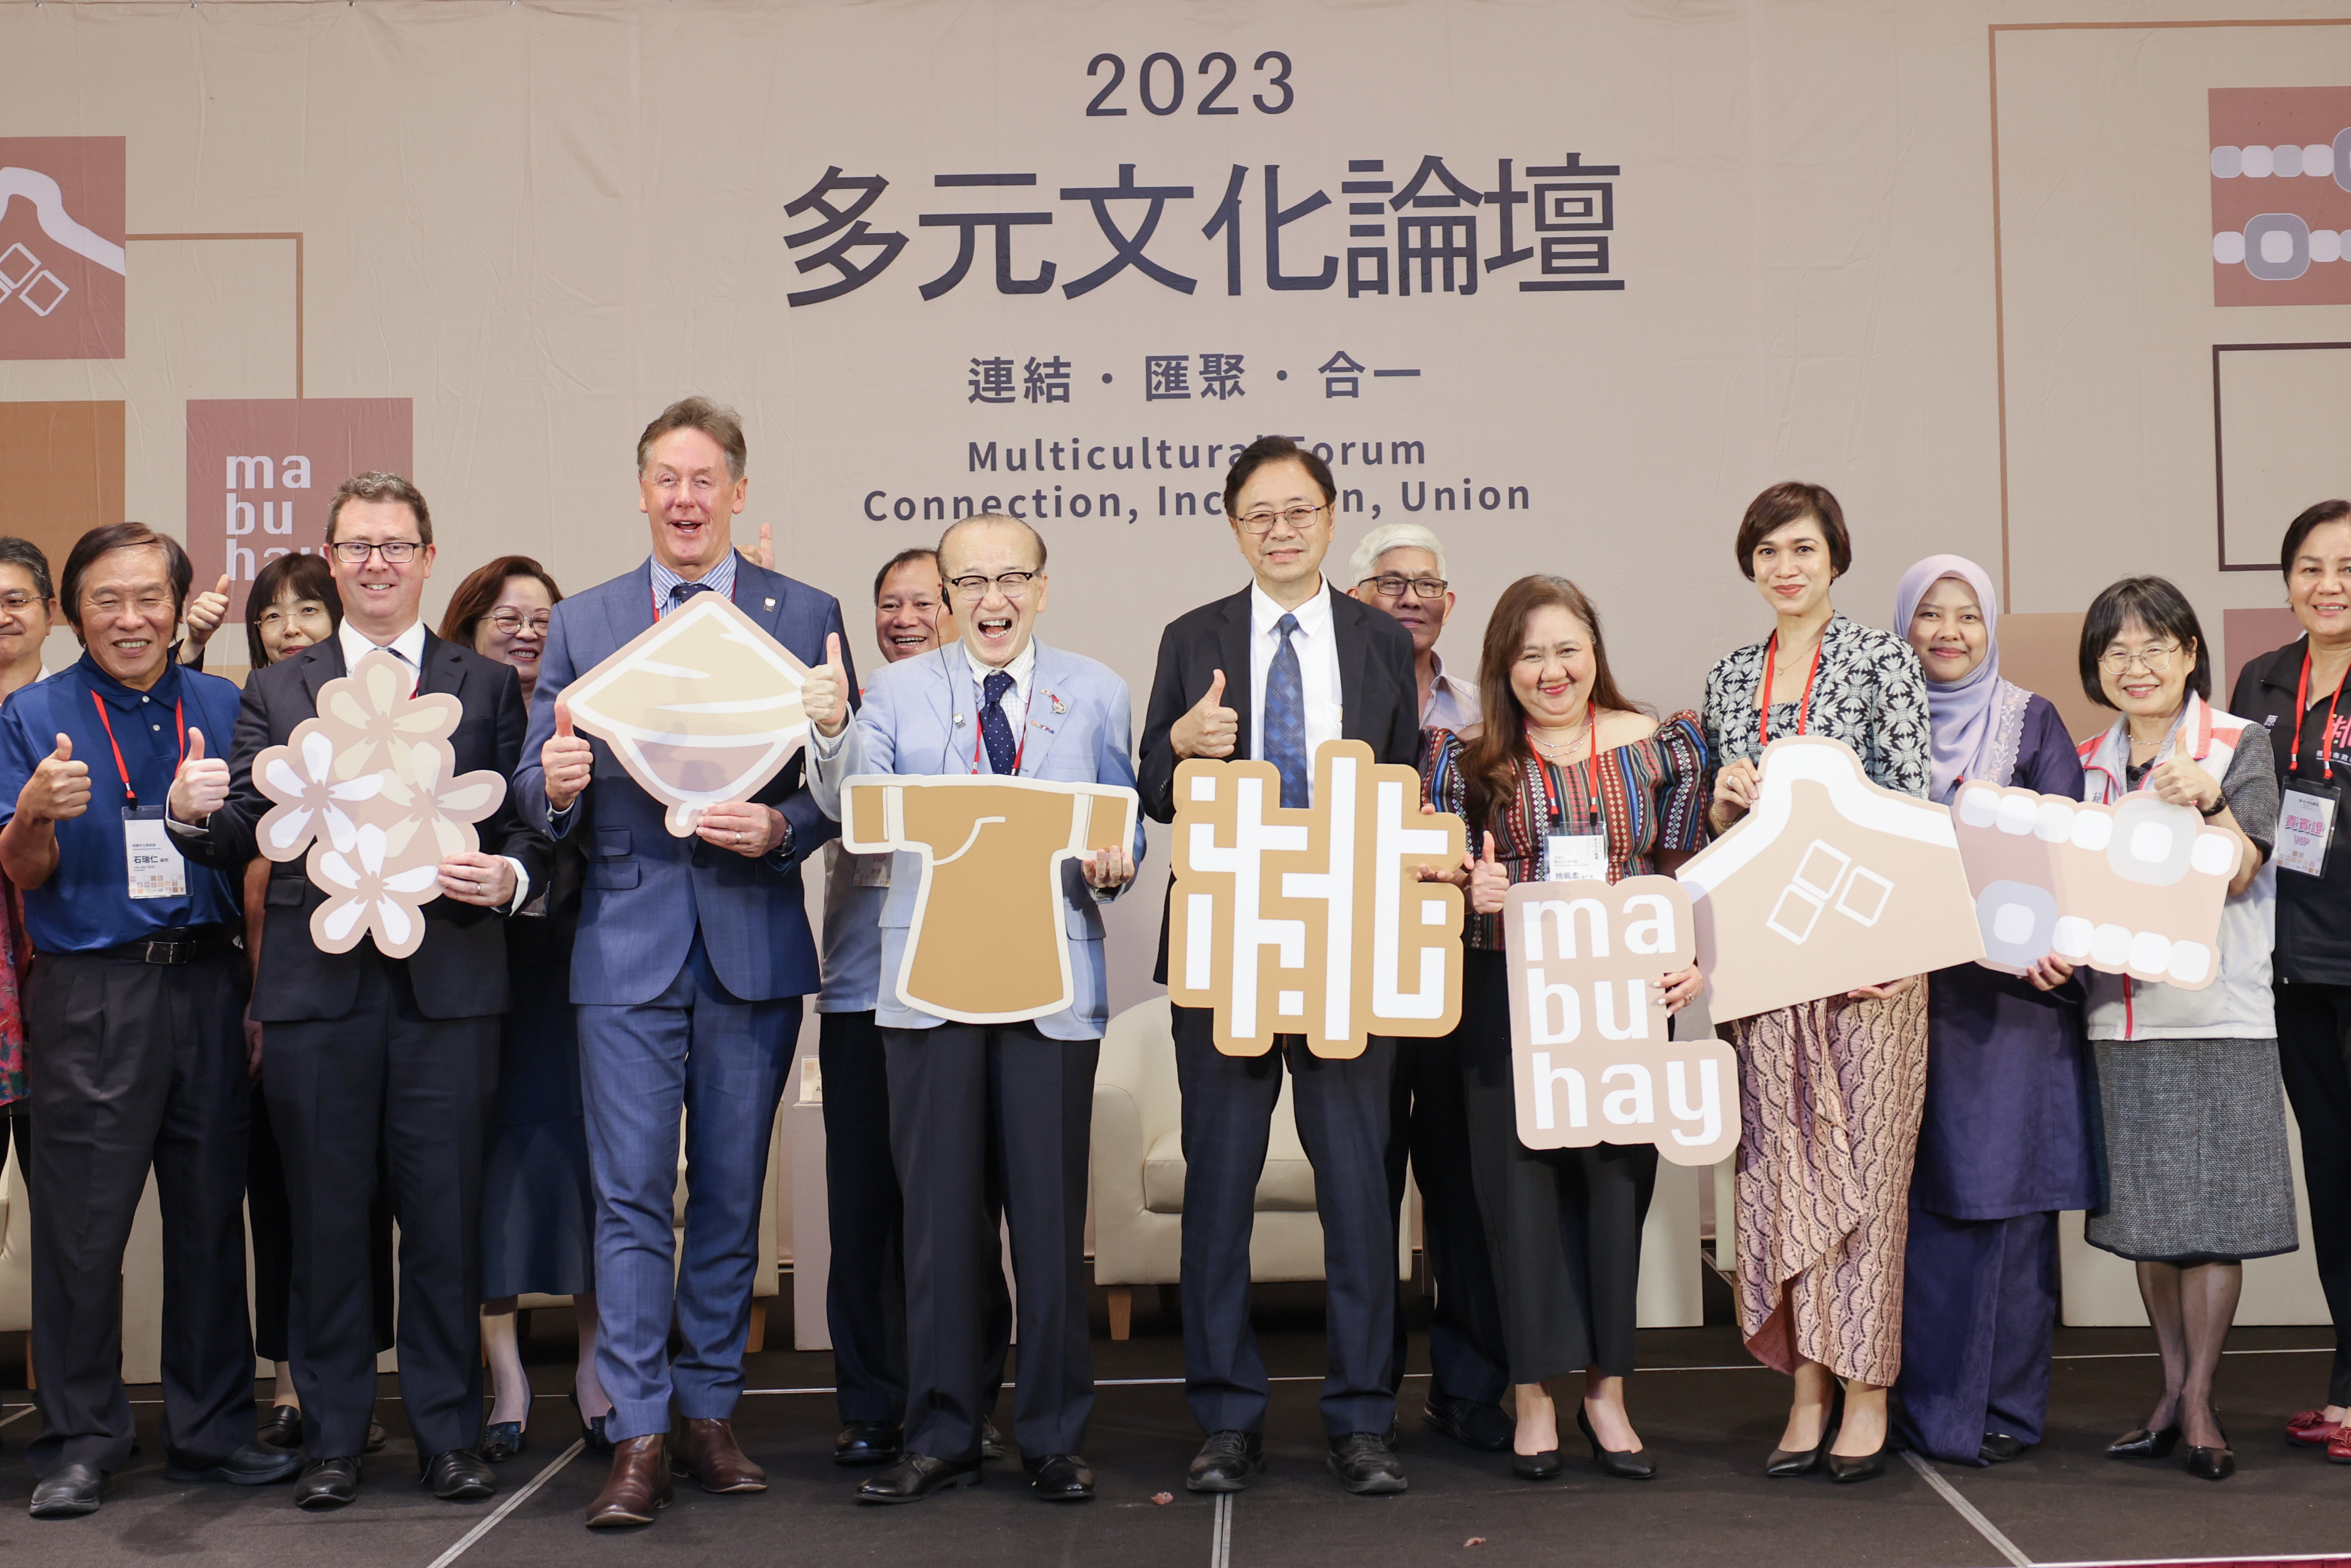 Delegates from several nations exchanged multicultural experiences during the Taoyuan 2023 Multicultural Forum.   Photo provided by Taoyuan City Government